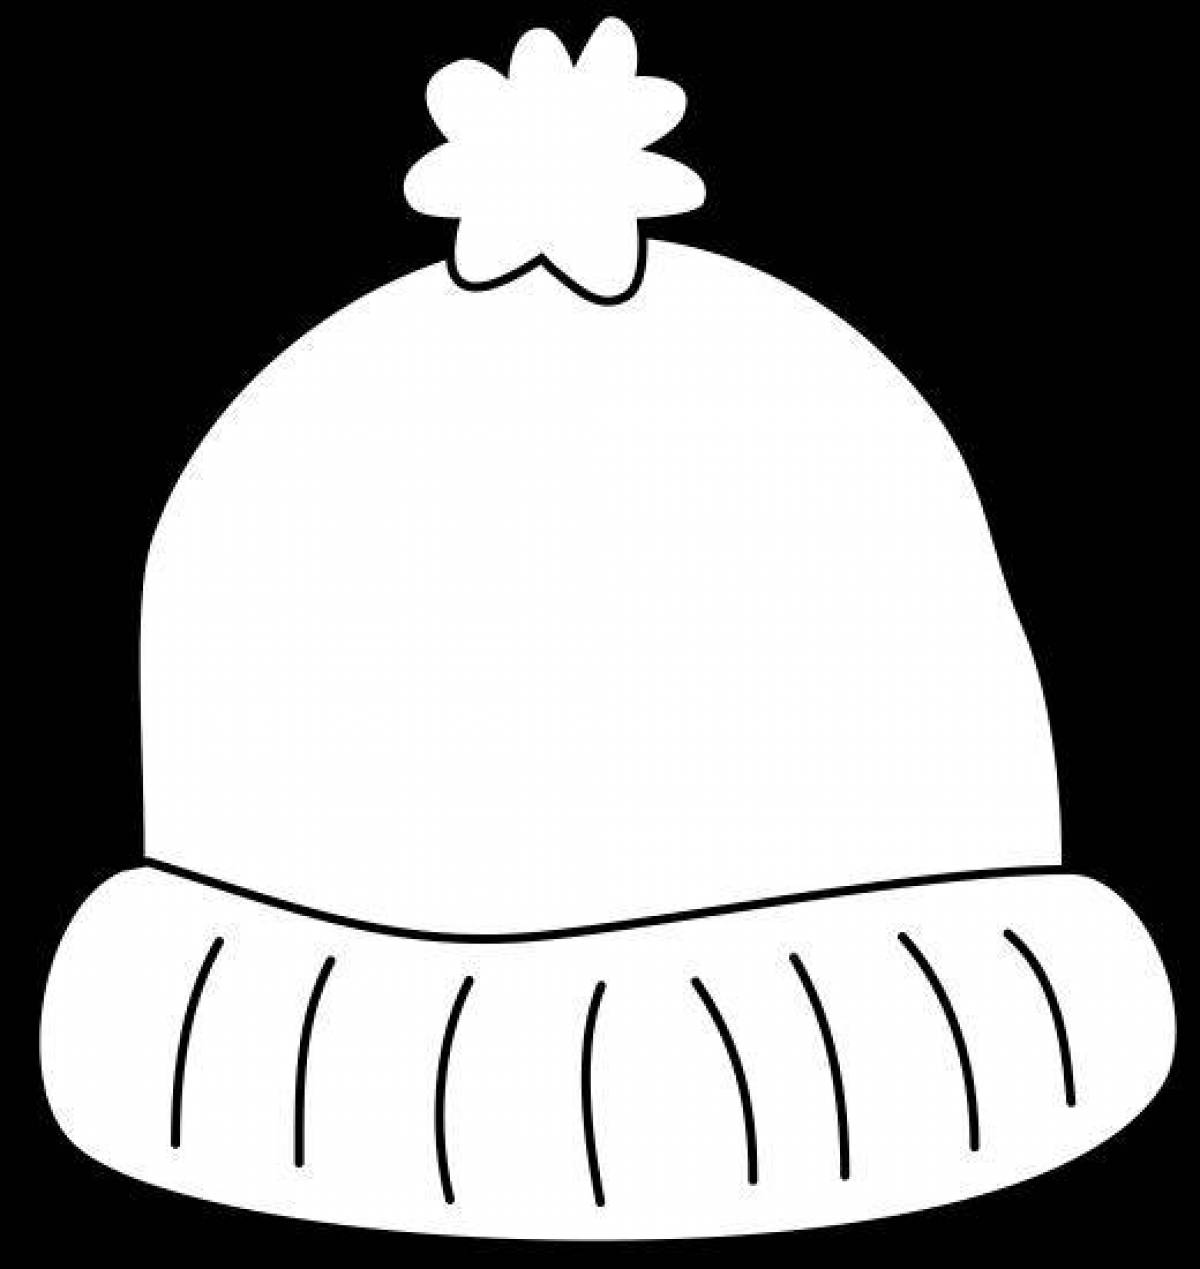 Hat picture for kids #8